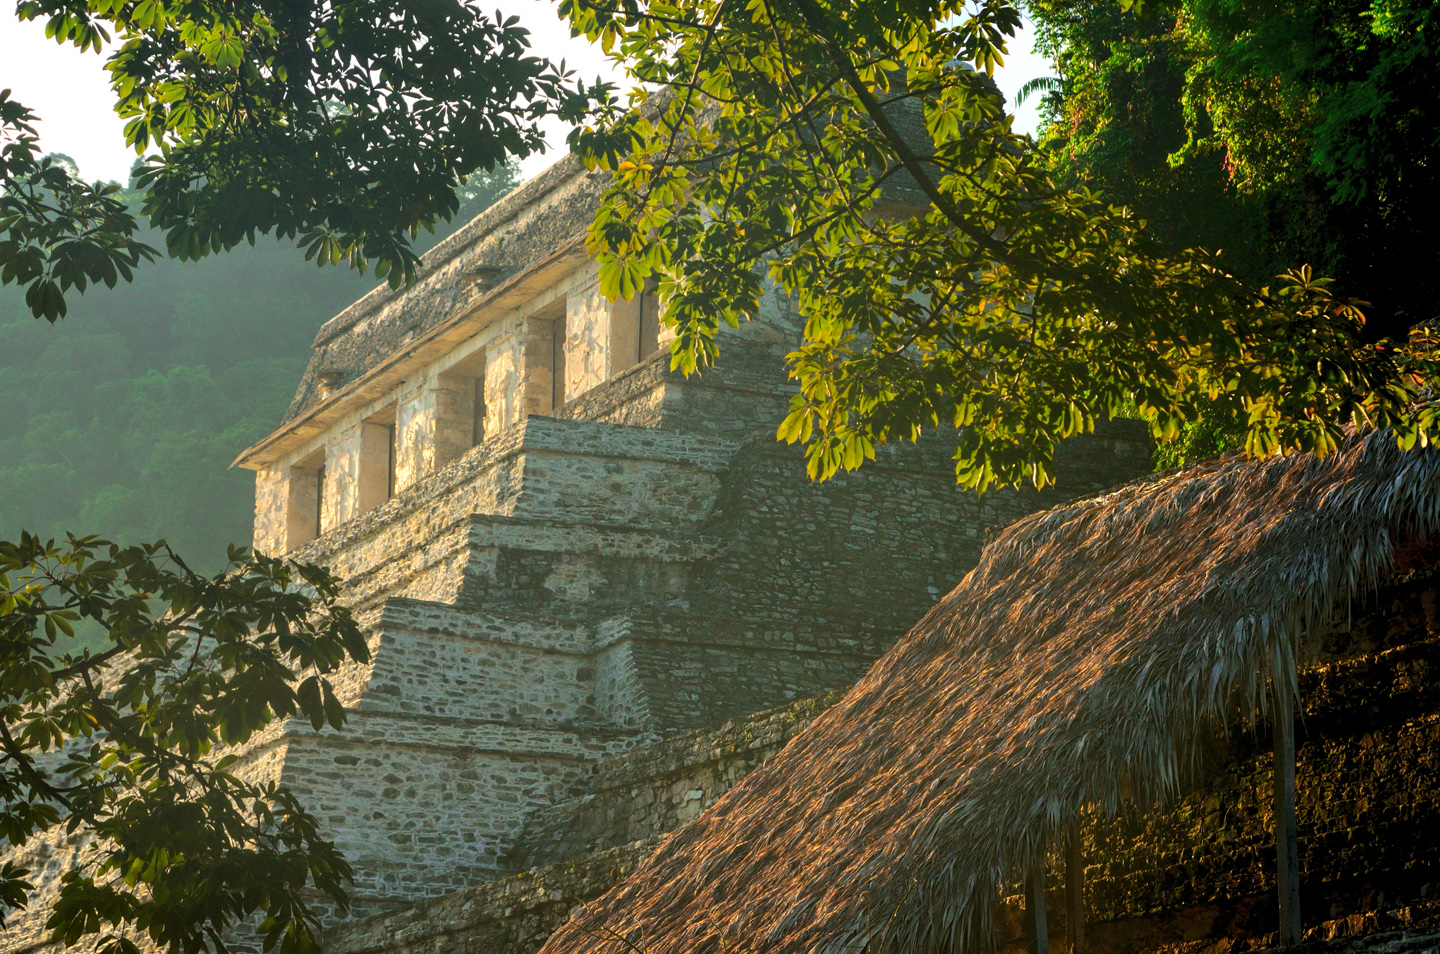 Palenque: Palaces and Pyramids in the Land of the Maya